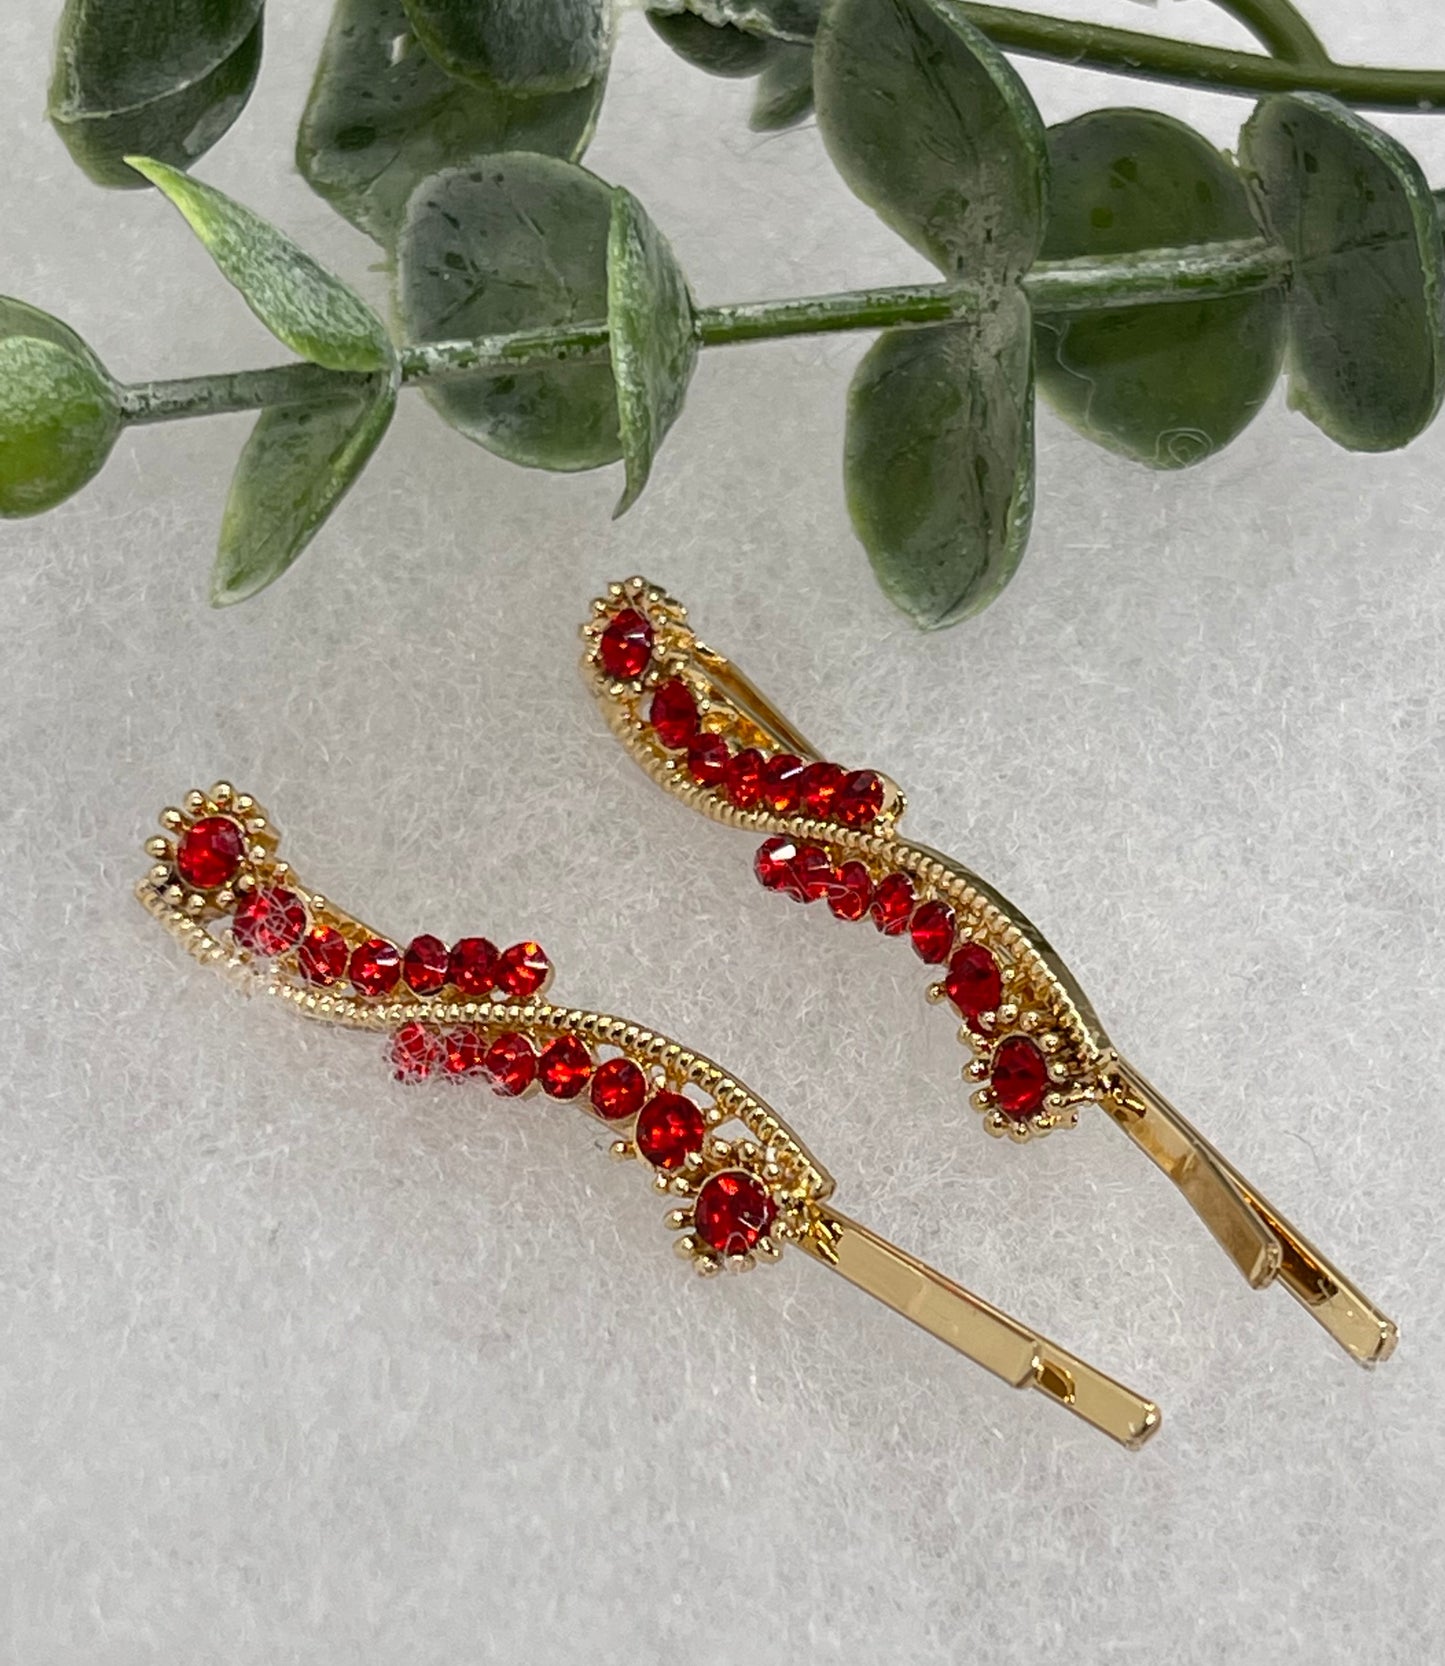 Red crystal rhinestone approximately 2.0” gold tone hair pins 2 pc set wedding bridal shower engagement formal princess accessory accessories